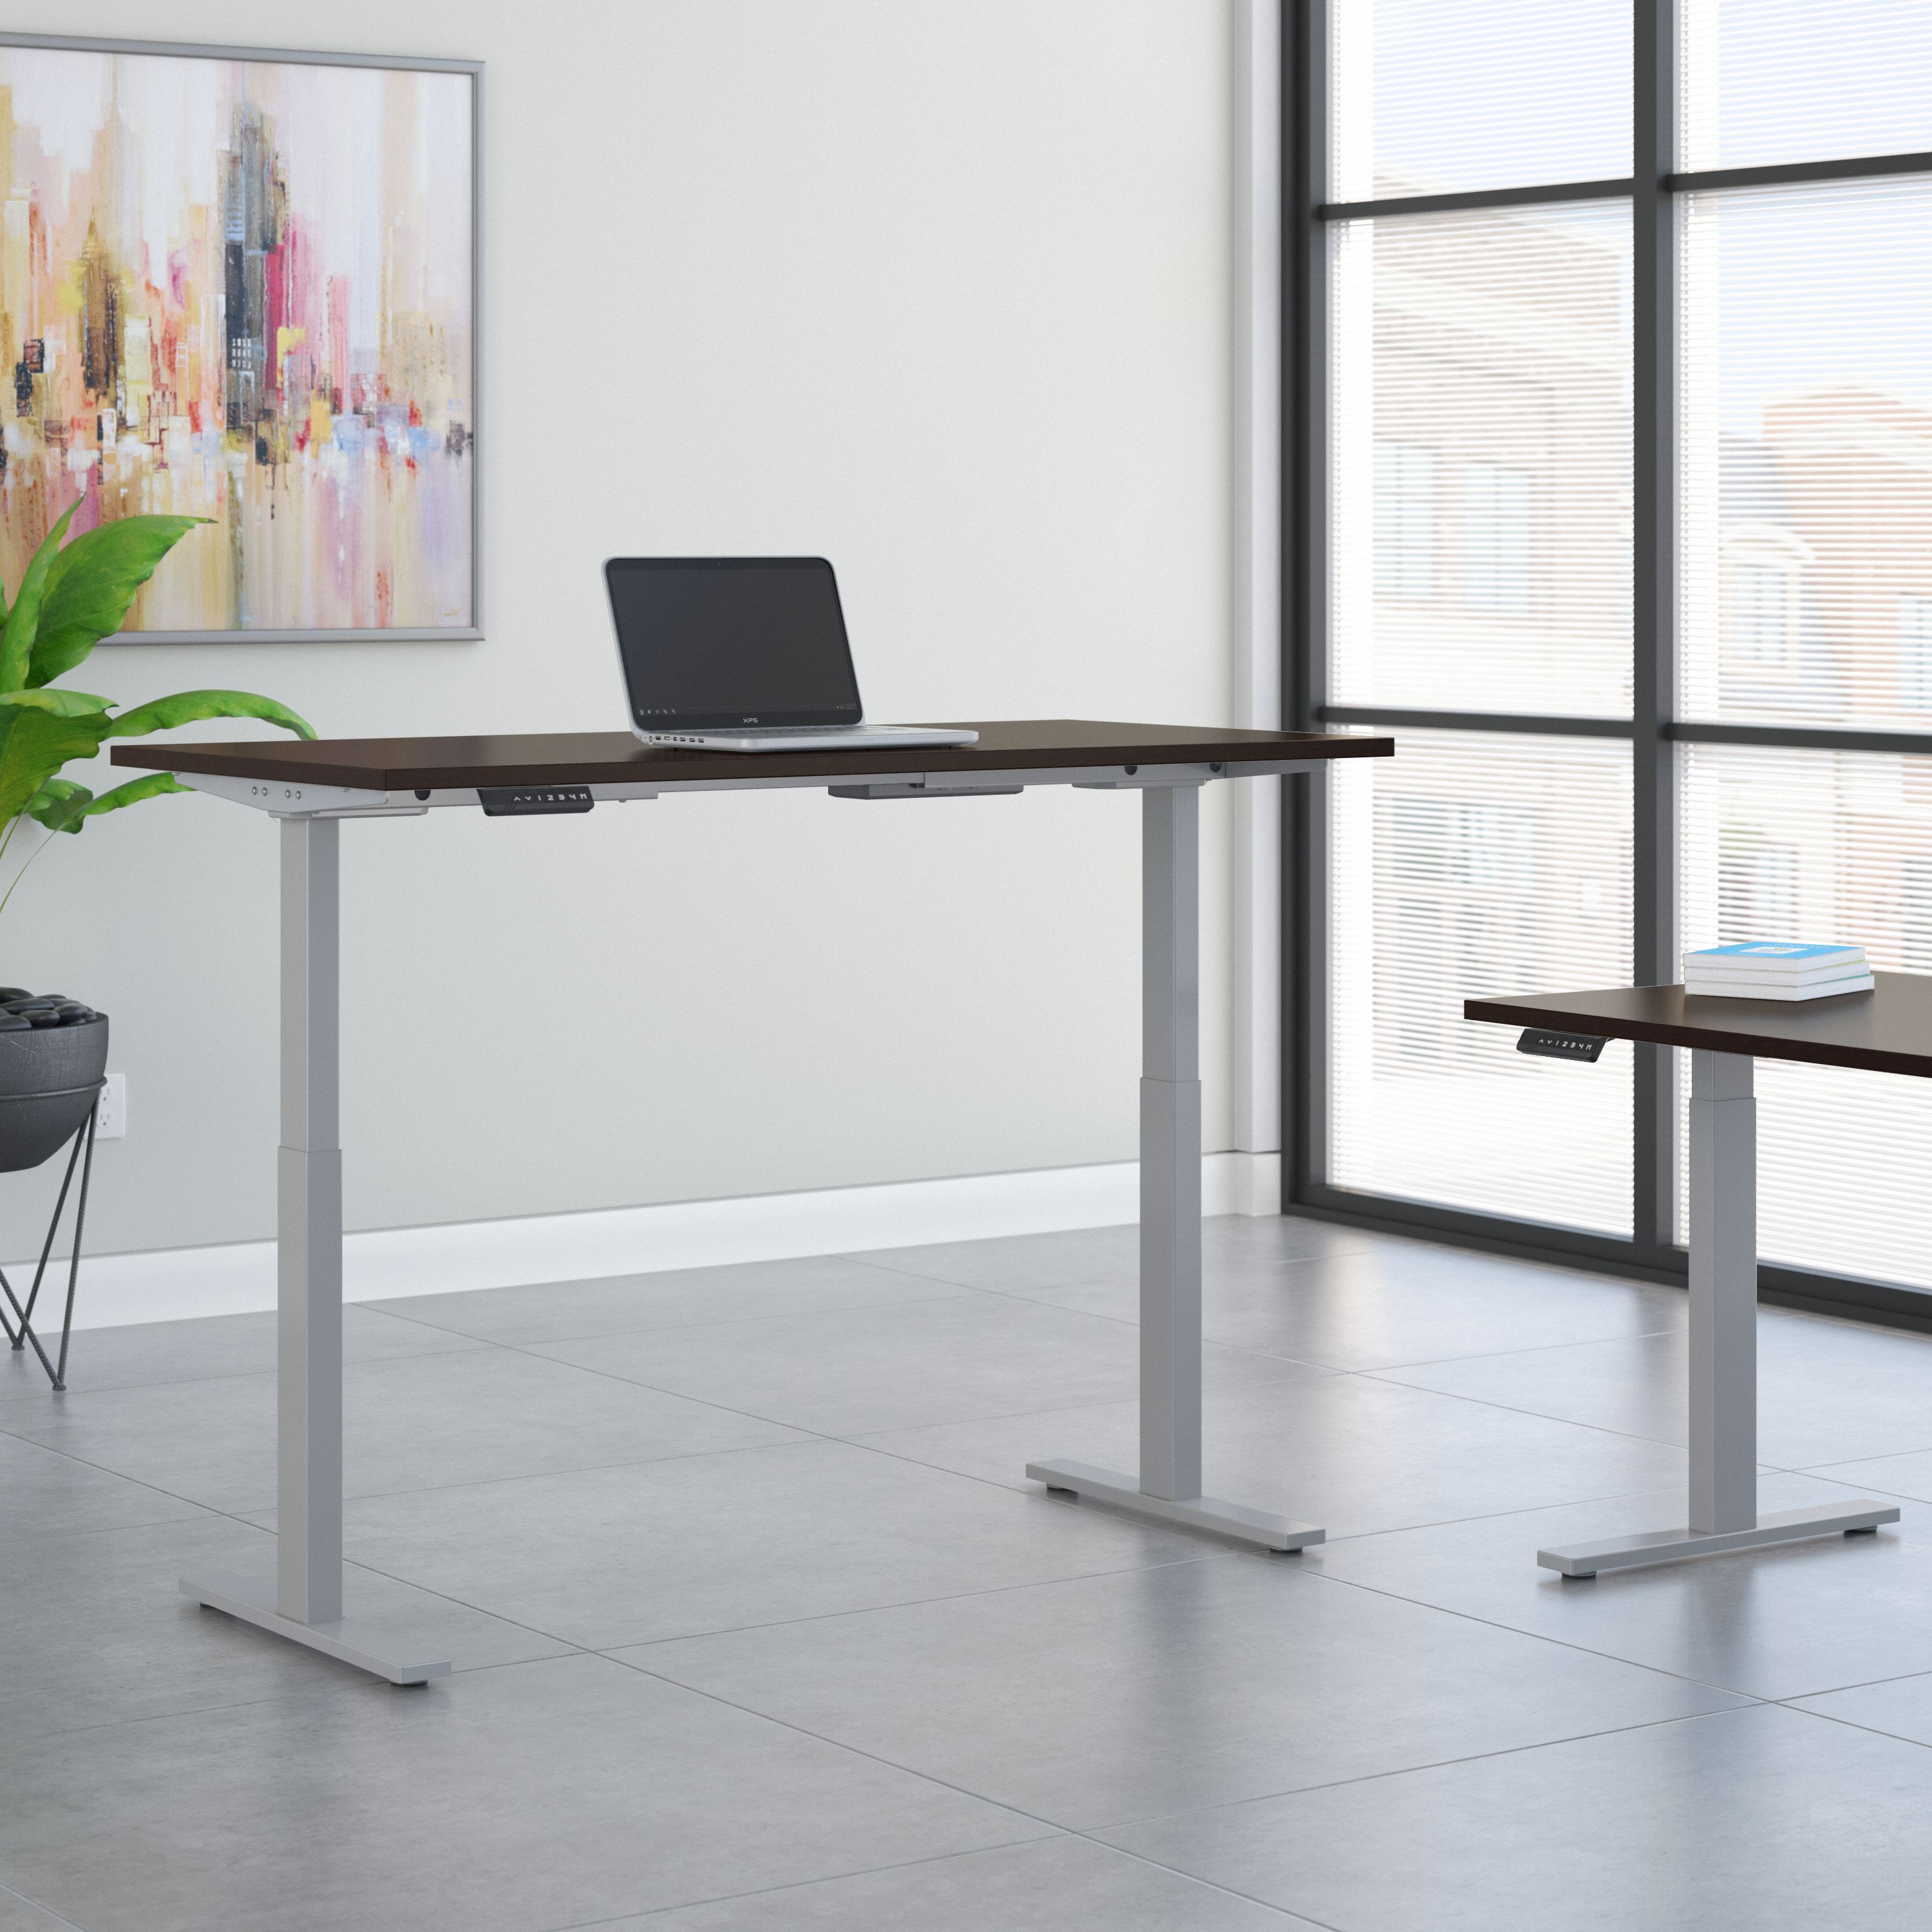 Shop Move 60 Series by Bush Business Furniture 60W x 30D Height Adjustable Standing Desk 01 M6S6030MRSK #color_mocha cherry/cool gray metallic